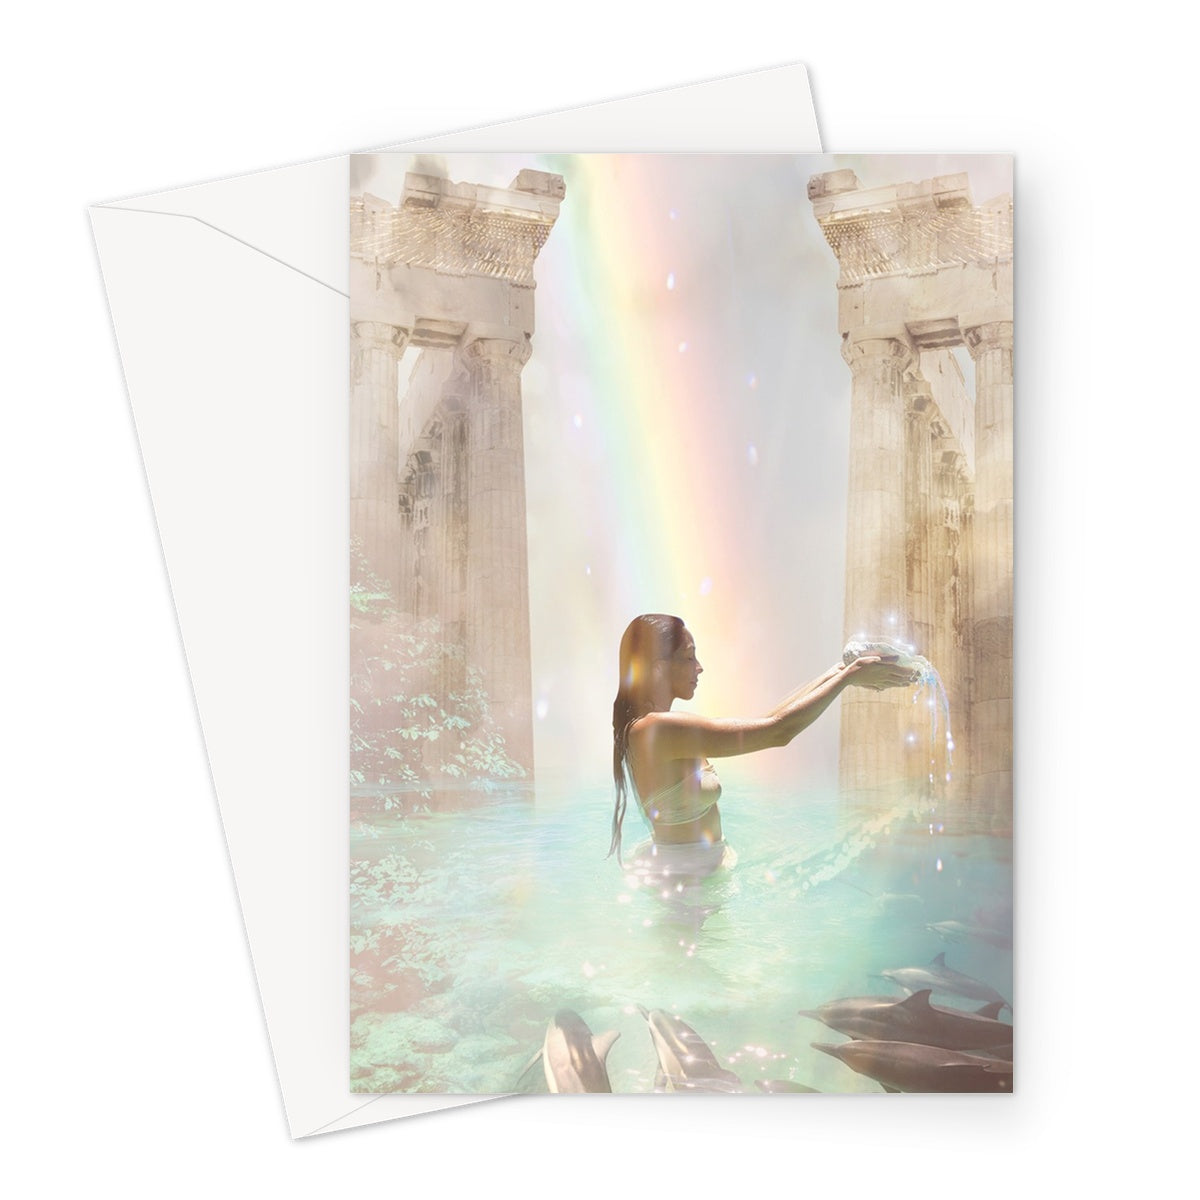 The Source Greeting Card - Starseed Designs Inc.